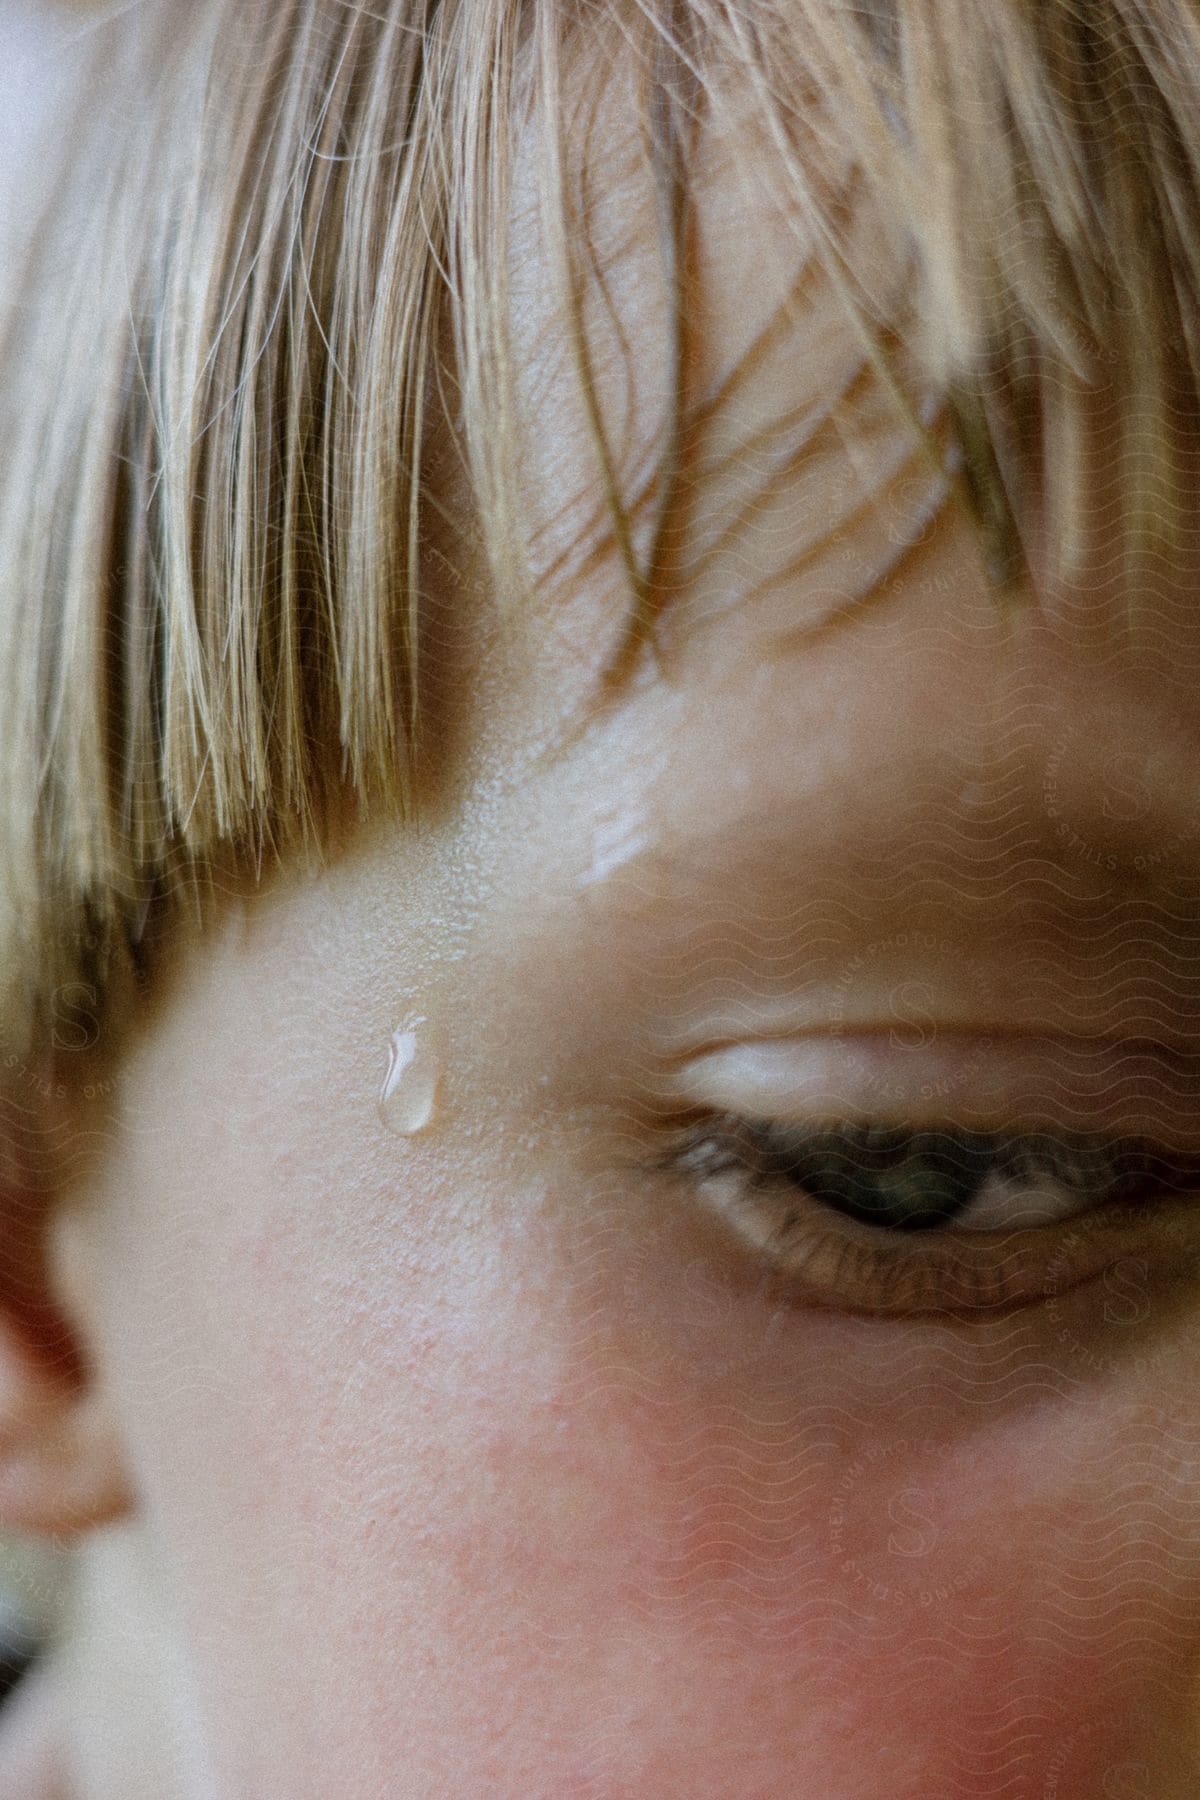 Close-up of a child's face with a drop of sweat on their cheek and blonde hair partially covering the forehead.